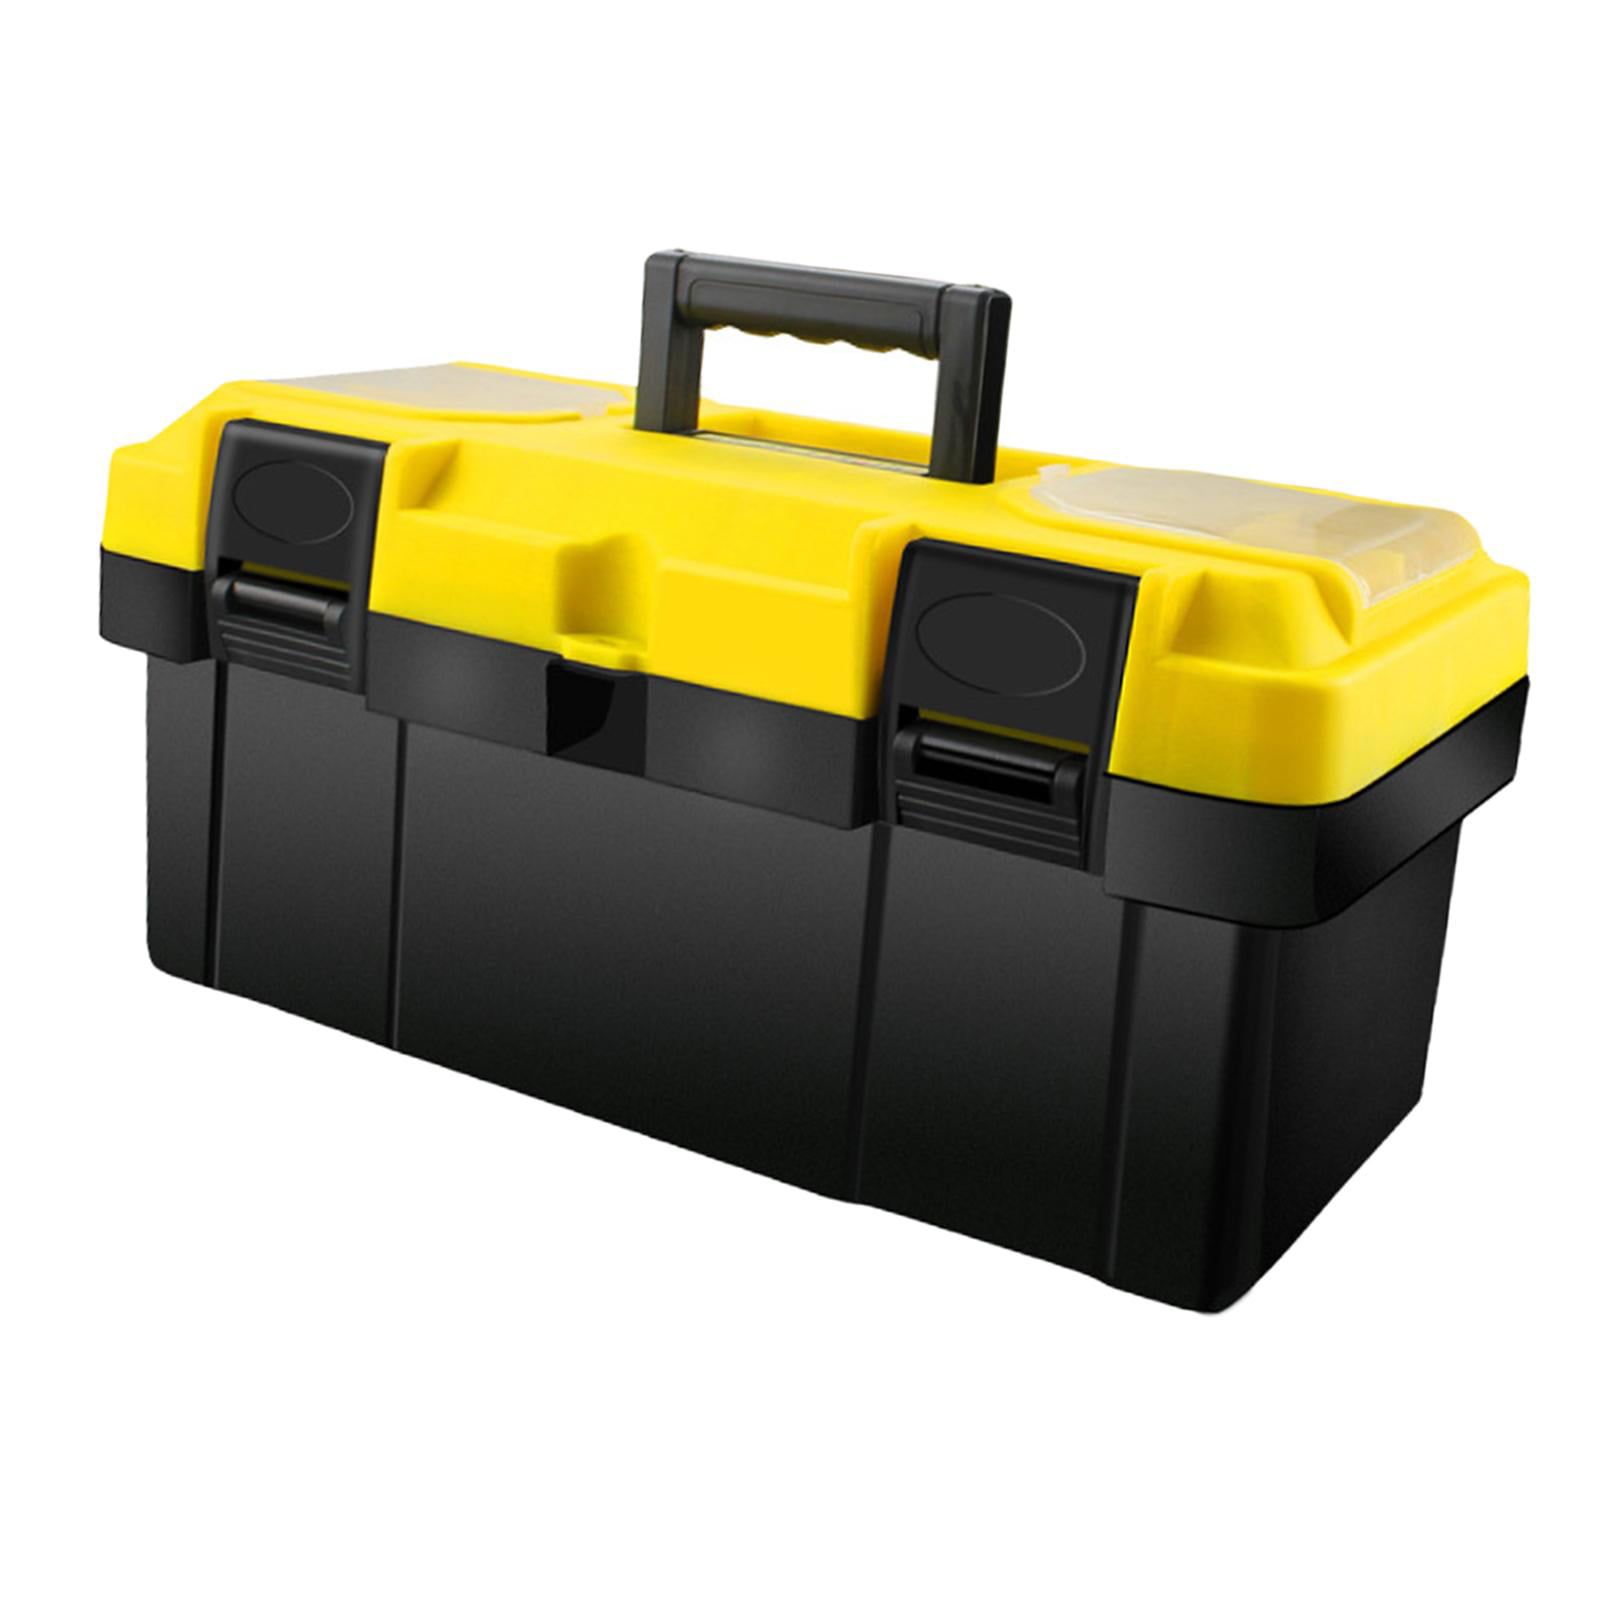 STANLEY Tool Box, 12.5-Inch (STST13331) 